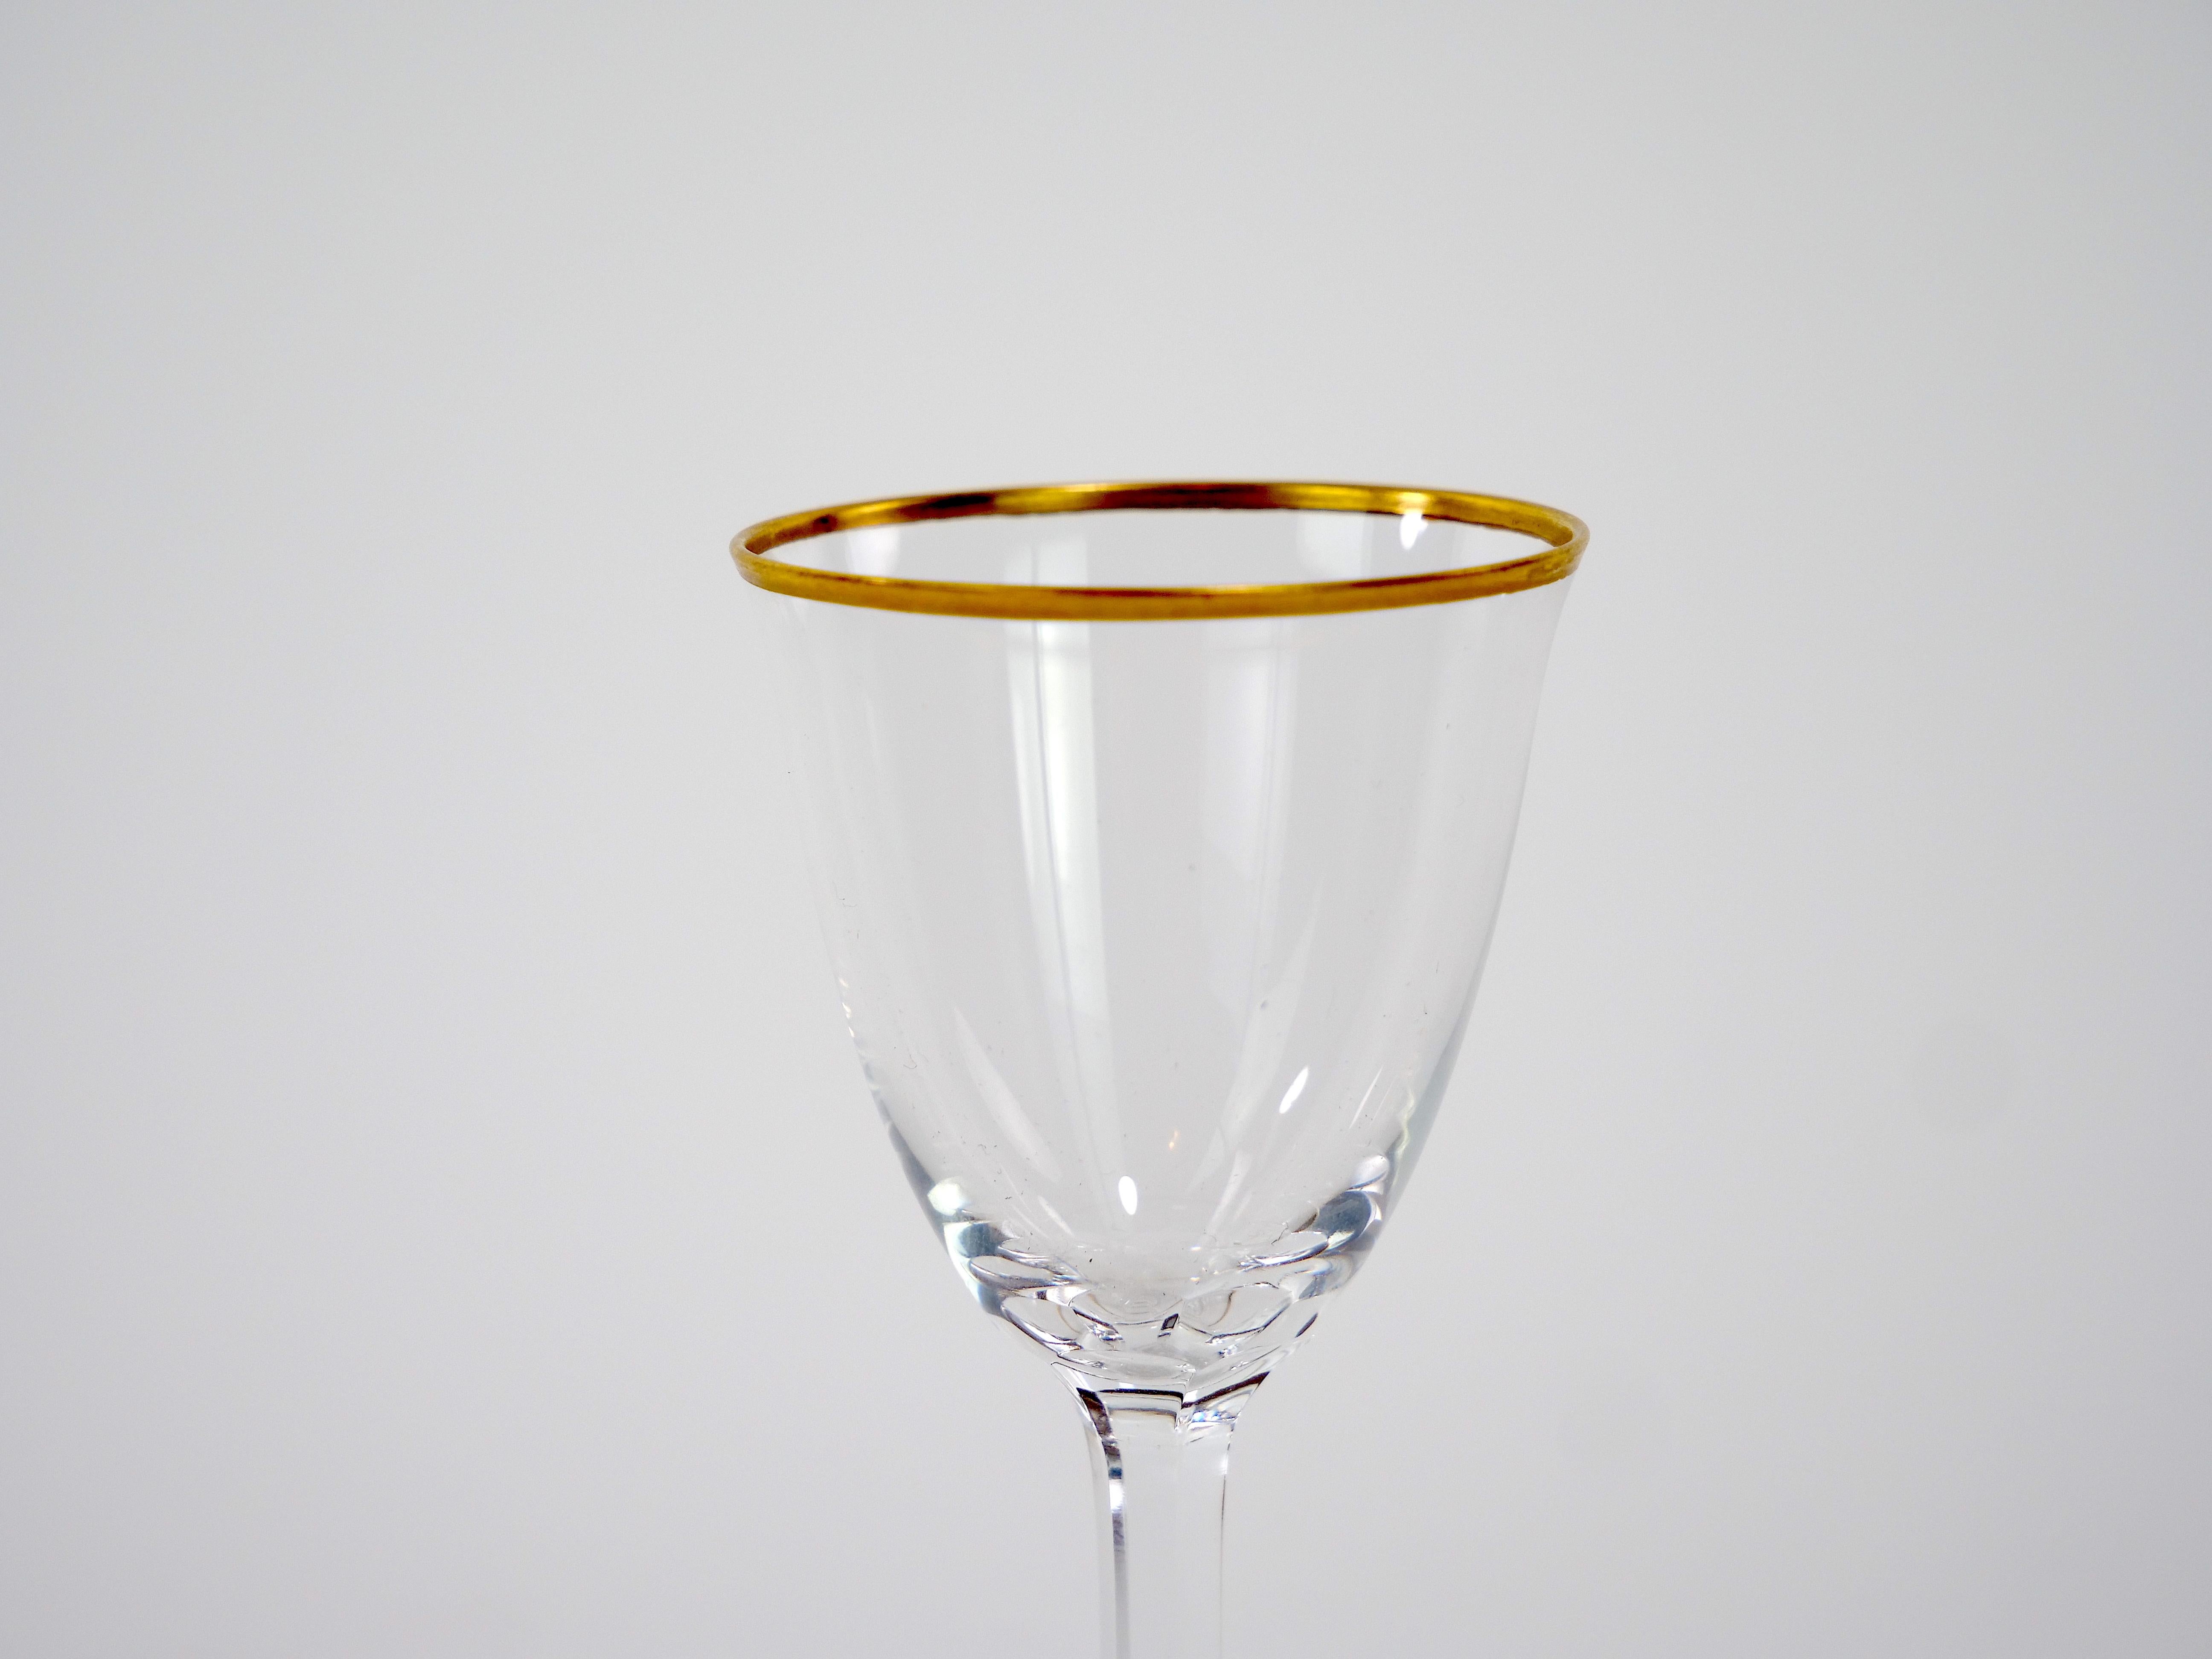 Baccarat Crystal Liquor / Sherry Glassware Service / 12 People For Sale 1